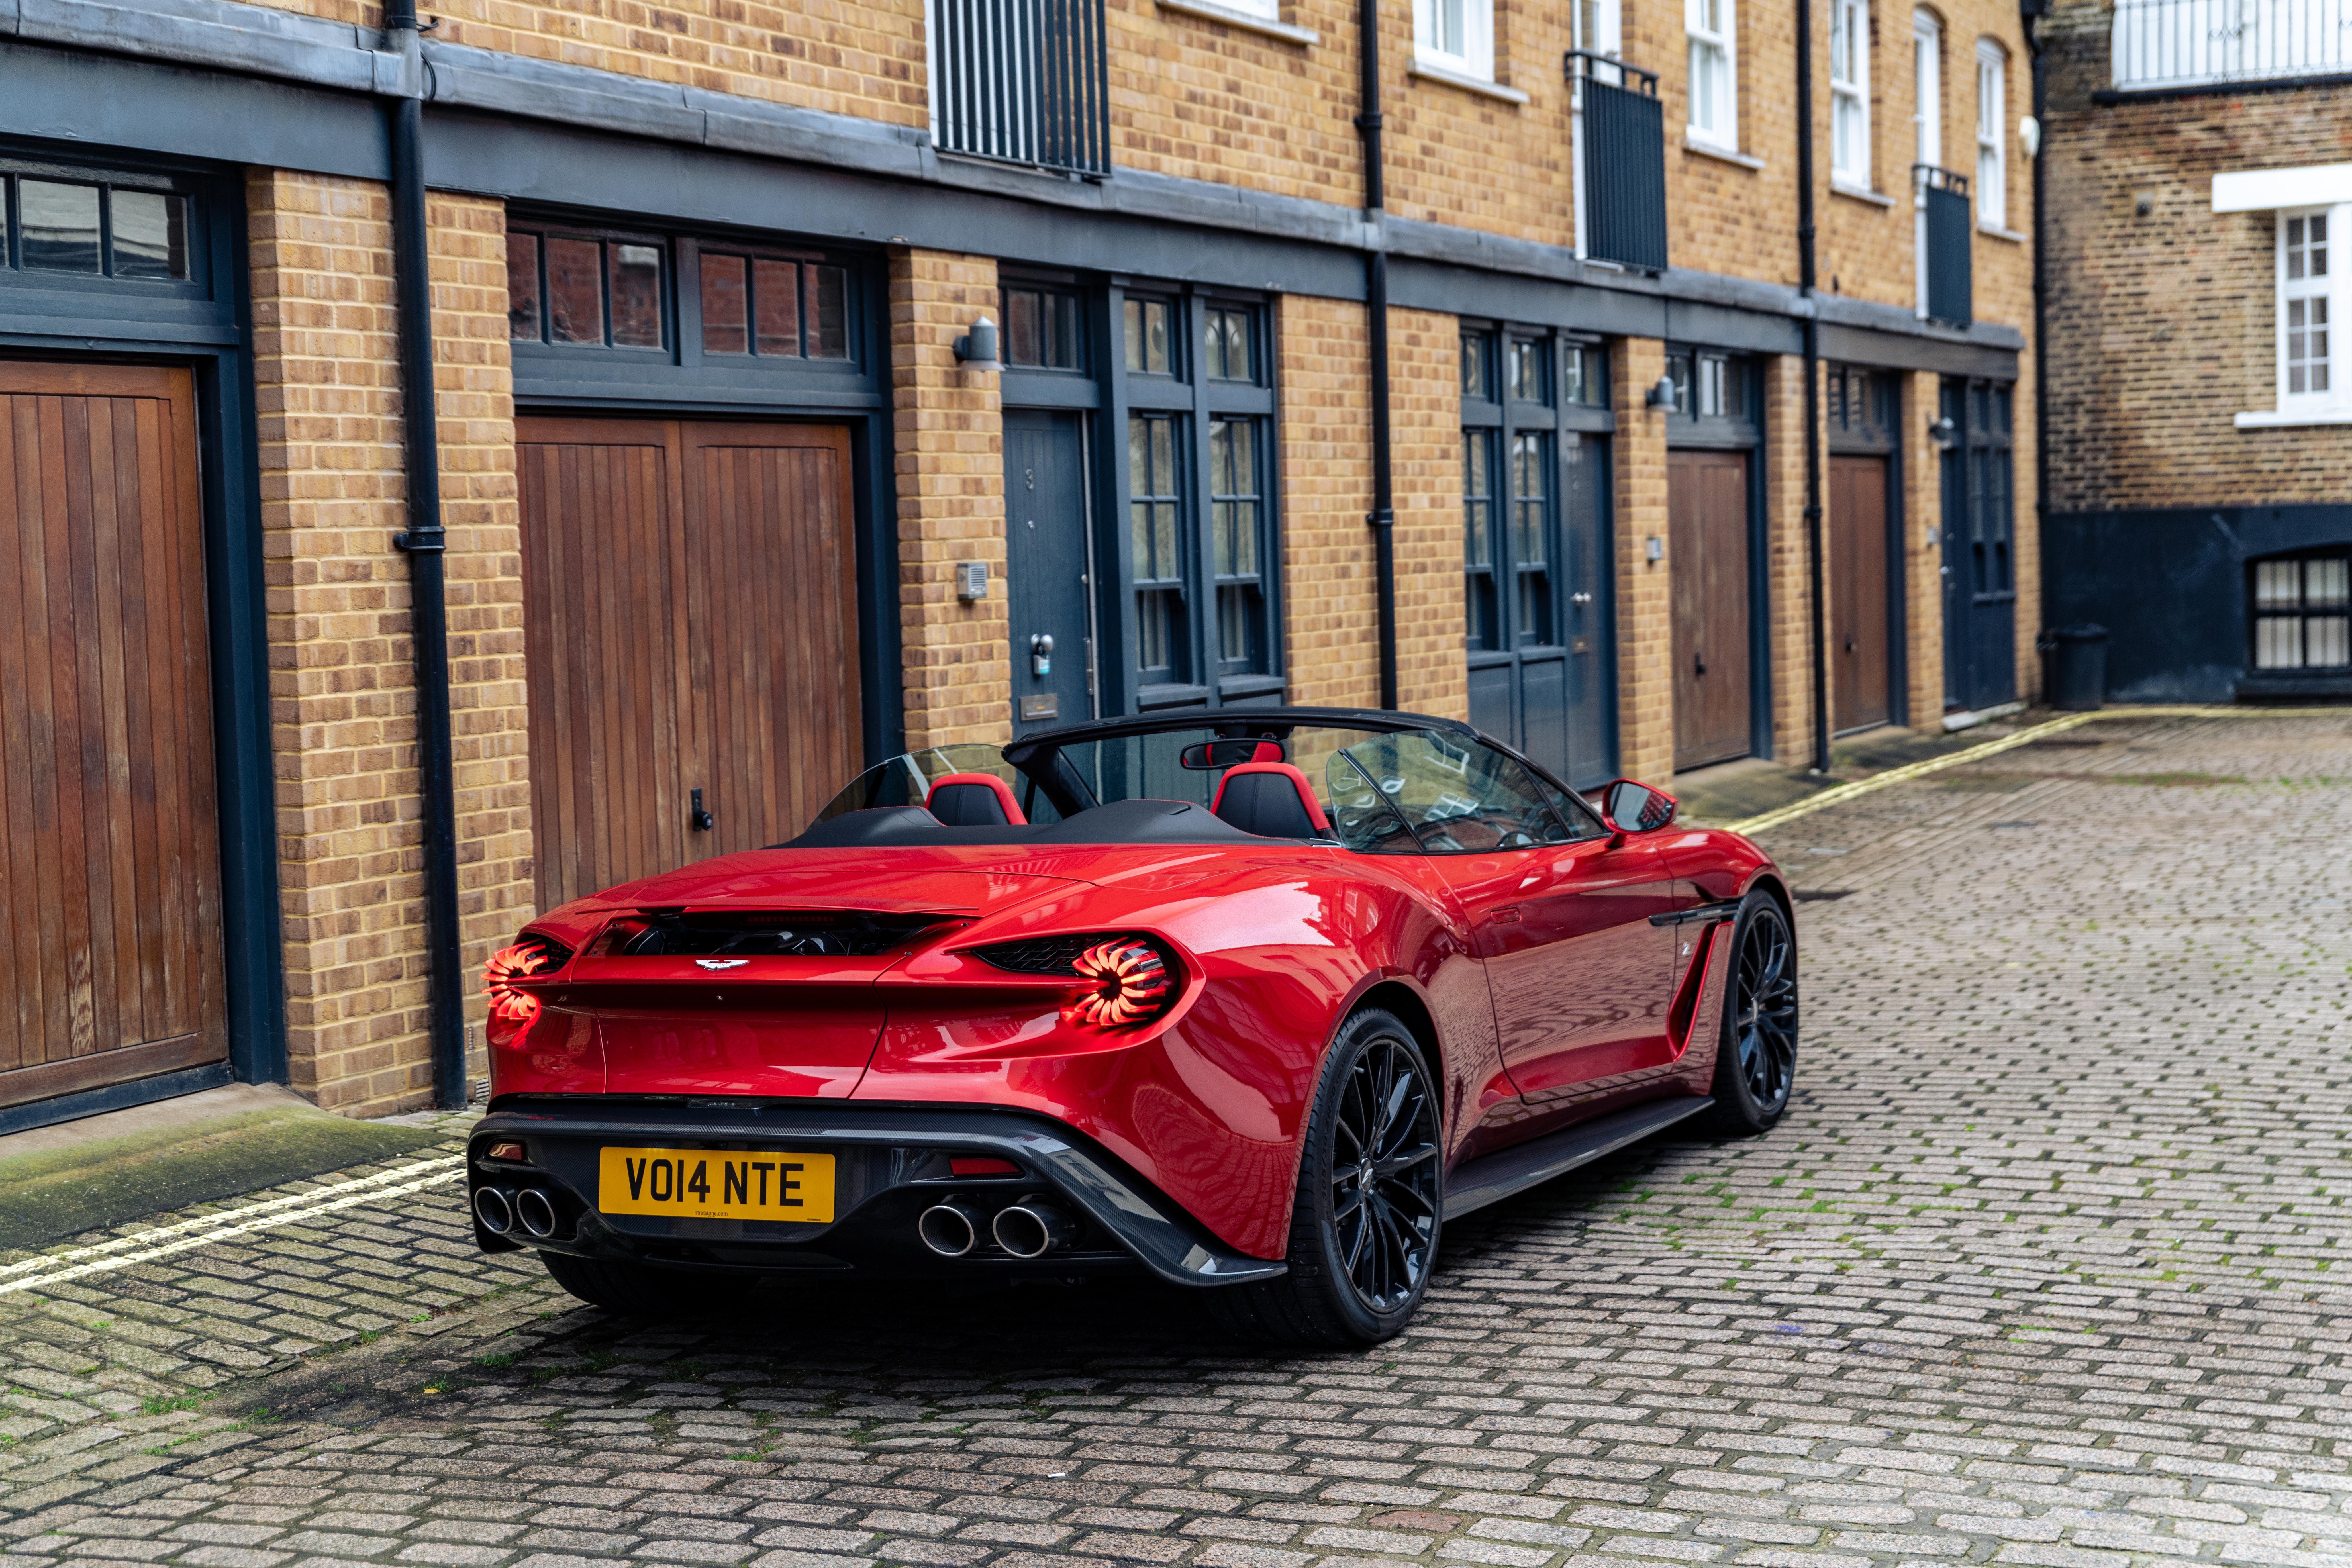 This Aston Martin Vanquish Zagato Volante is a striking and impressive example of the extremely rare and beautifully styled coach-built open-top supercar, offered with less than running-in mileage. 1